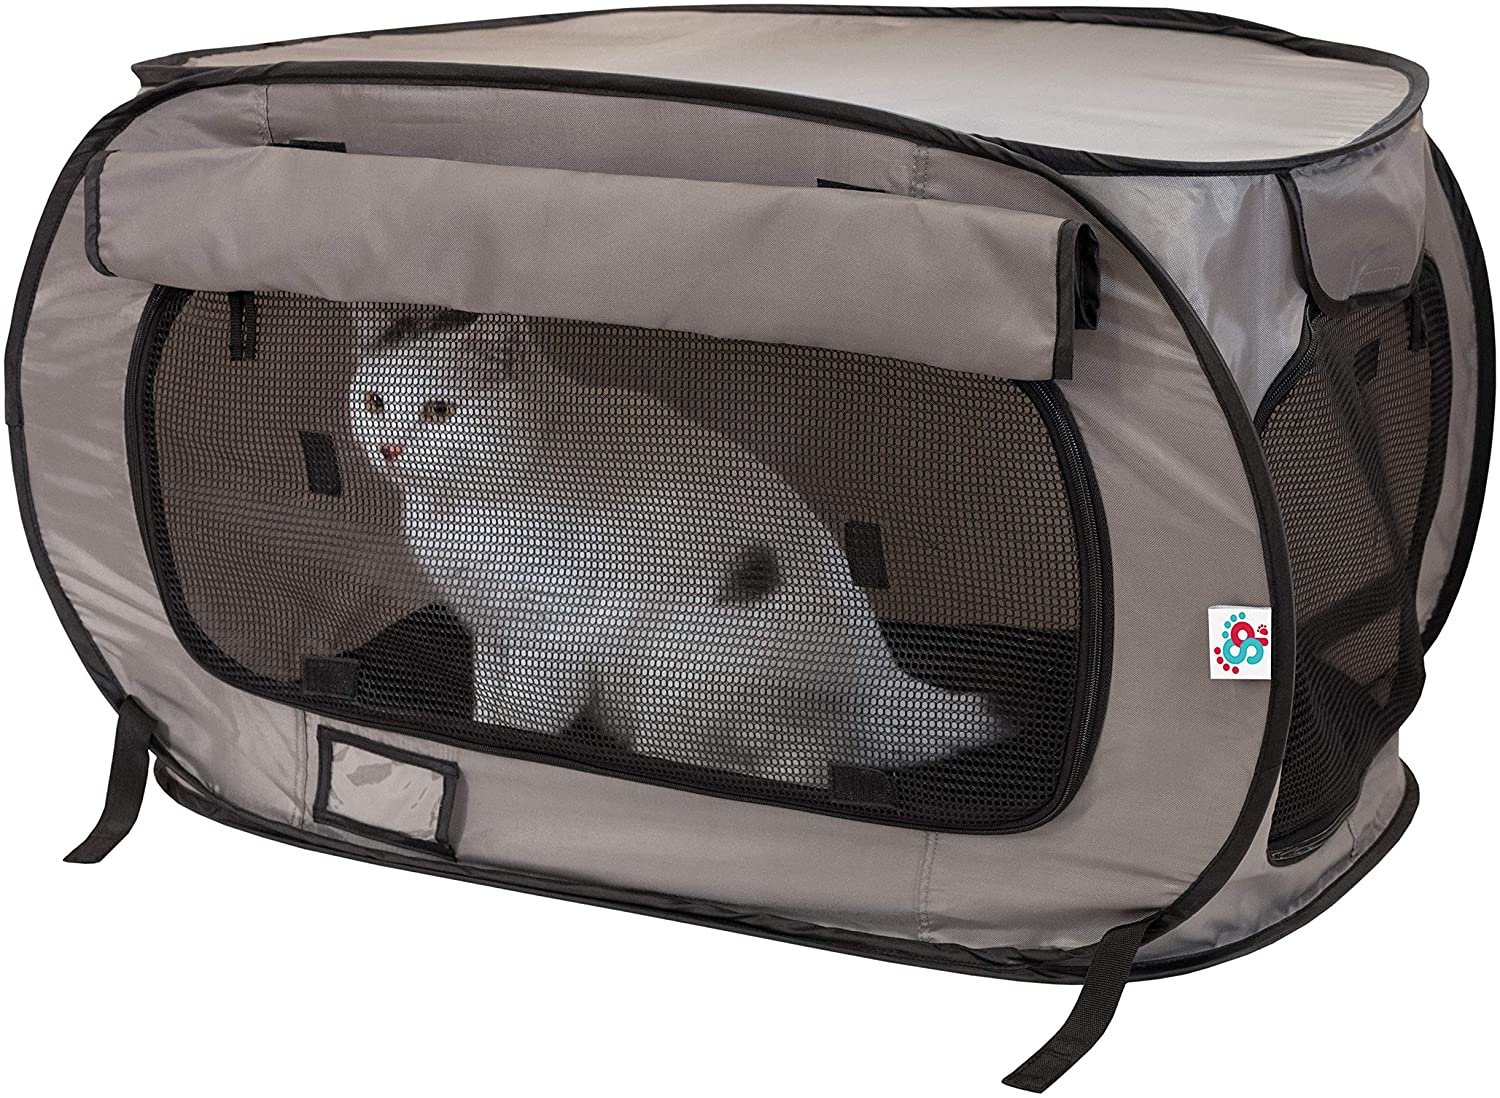 Sport PET Large Pop Open Kennel, Portable Cat Cage Kennel, Waterproof Pet Bed, Travel Litter Collection